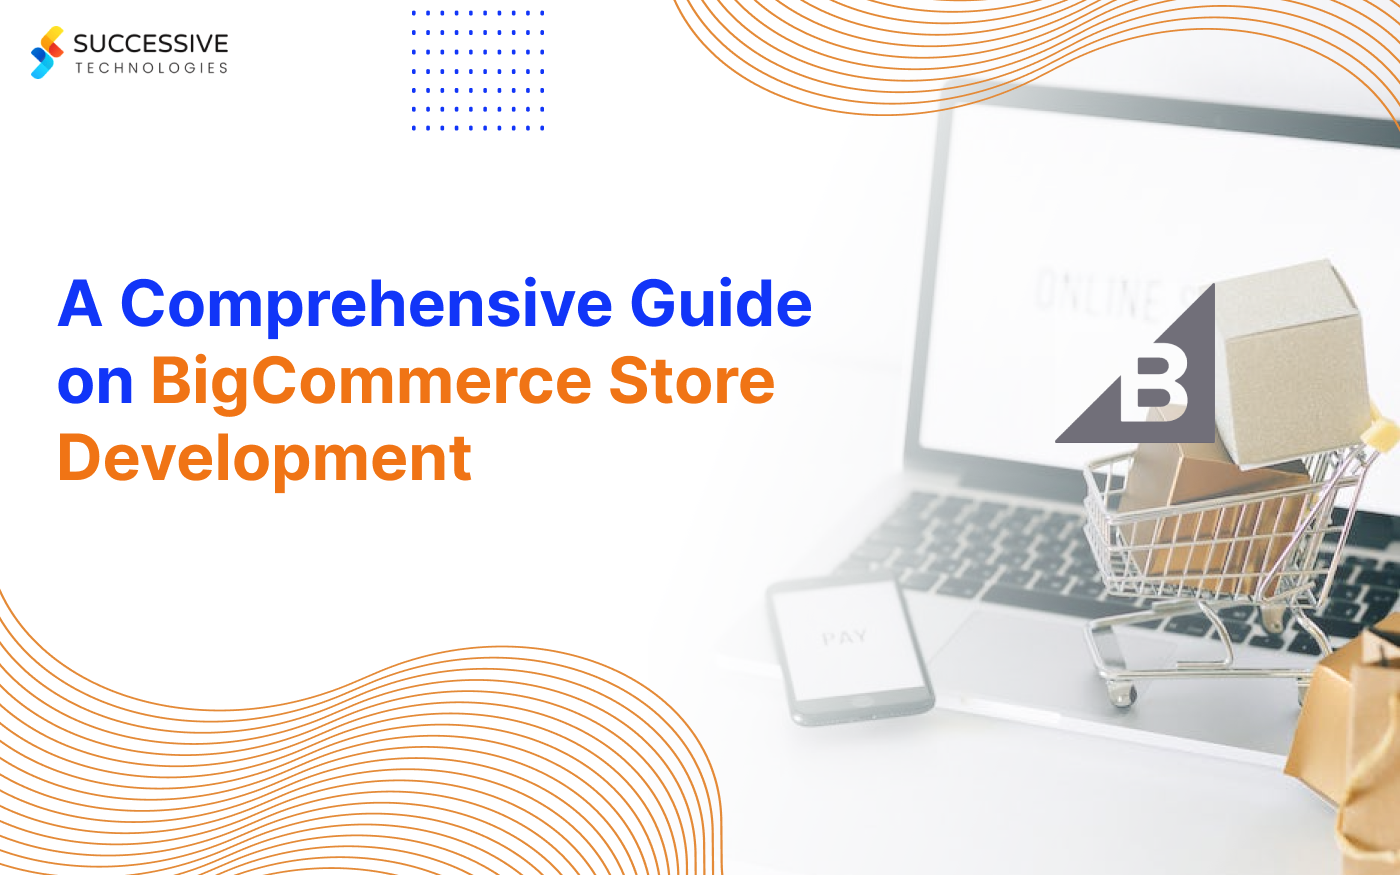 Everything You Need to Know About BigCommerce Development